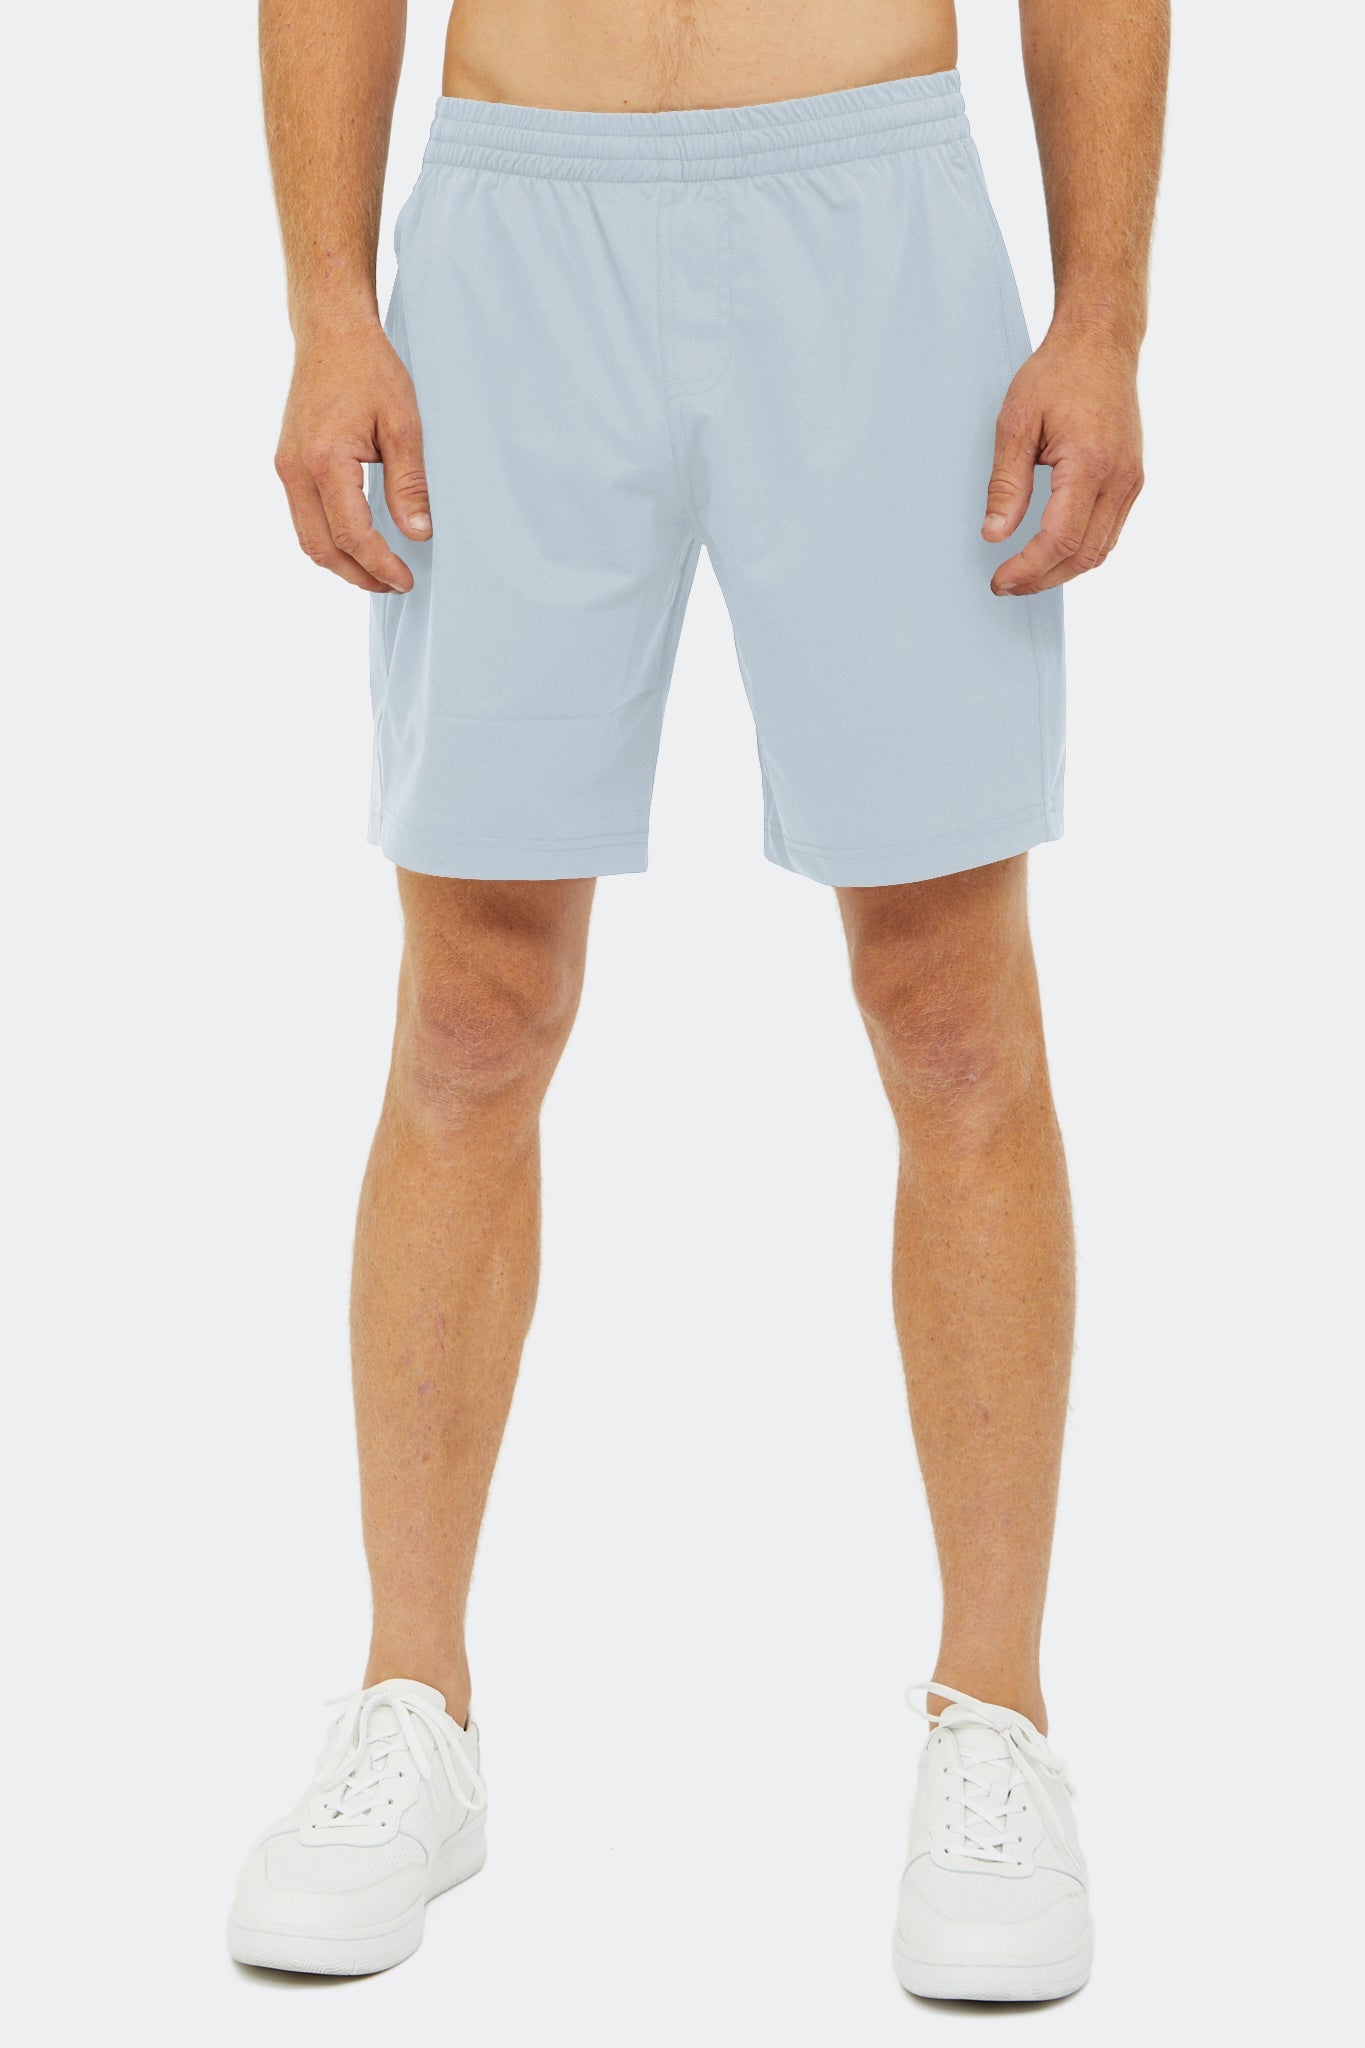 Image of the byron tennis short in harbor mist